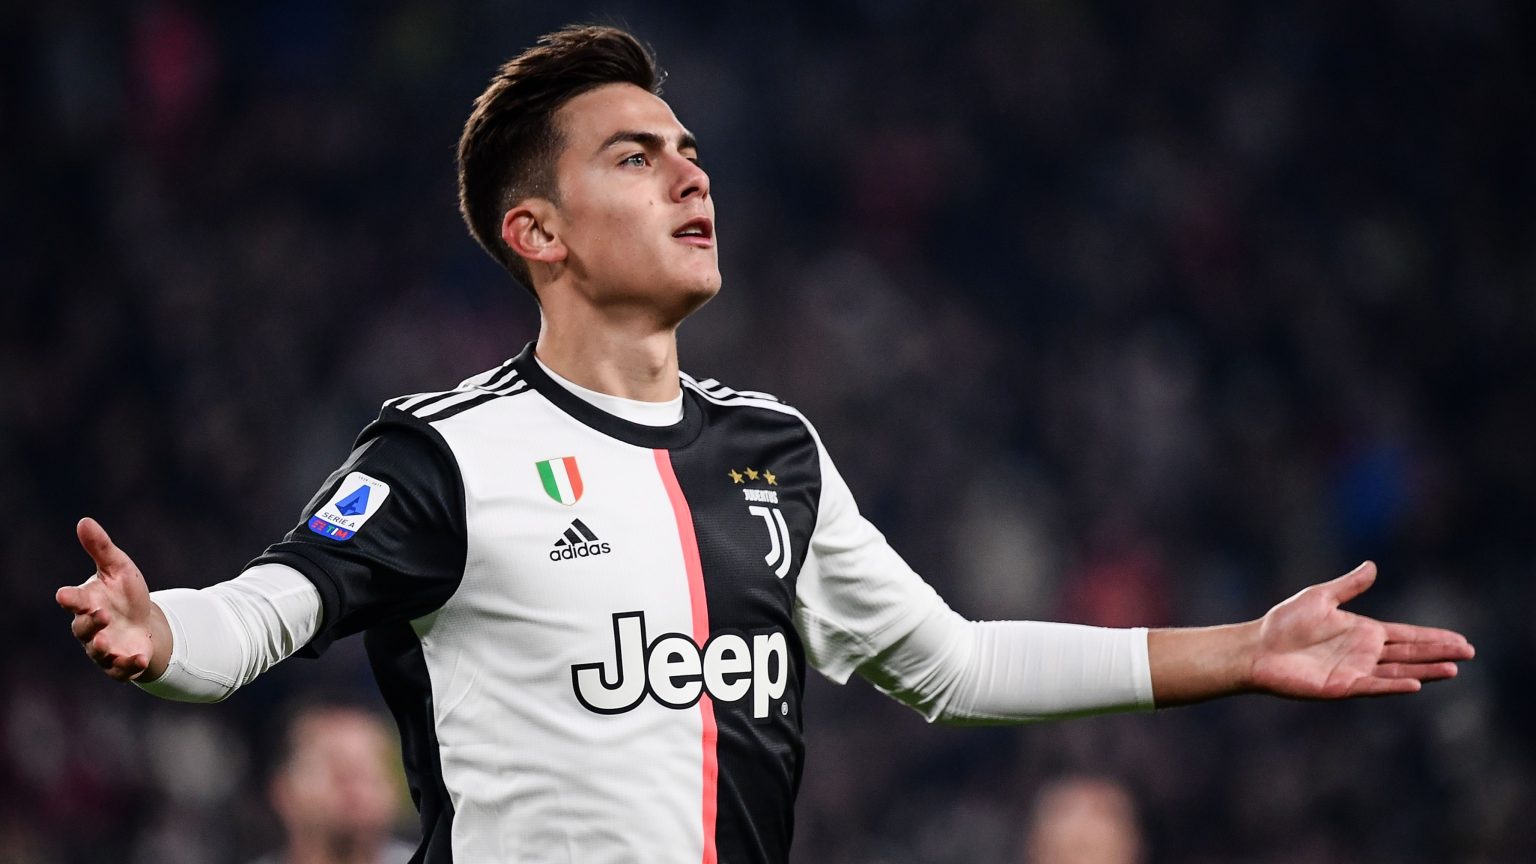 Chelsea are yet to make a move for Juventus star Paulo Dybala